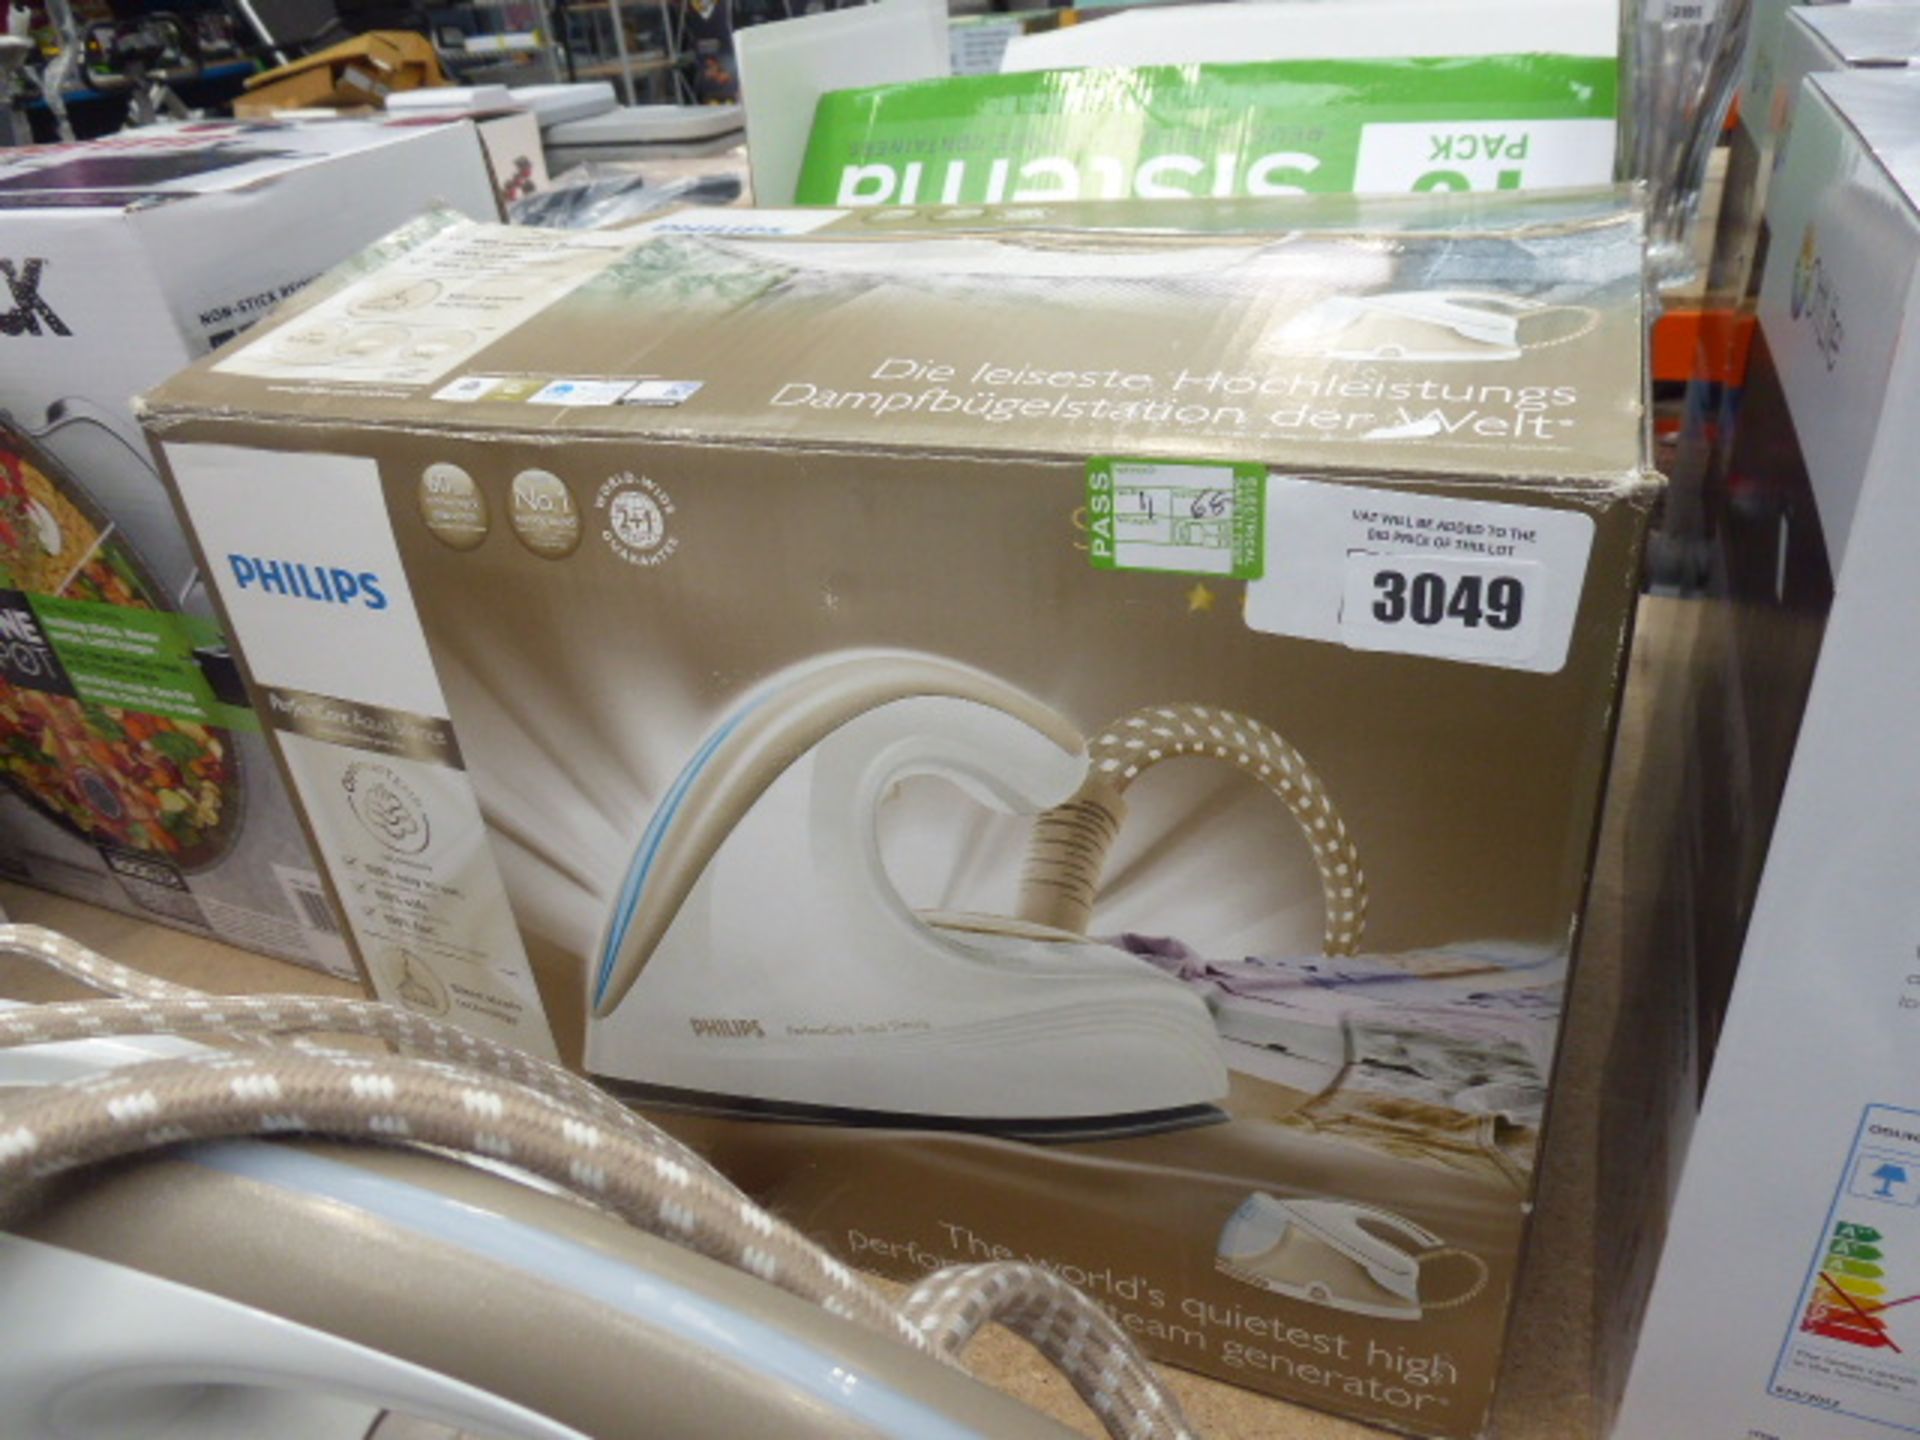 Boxed Phillips steam iron